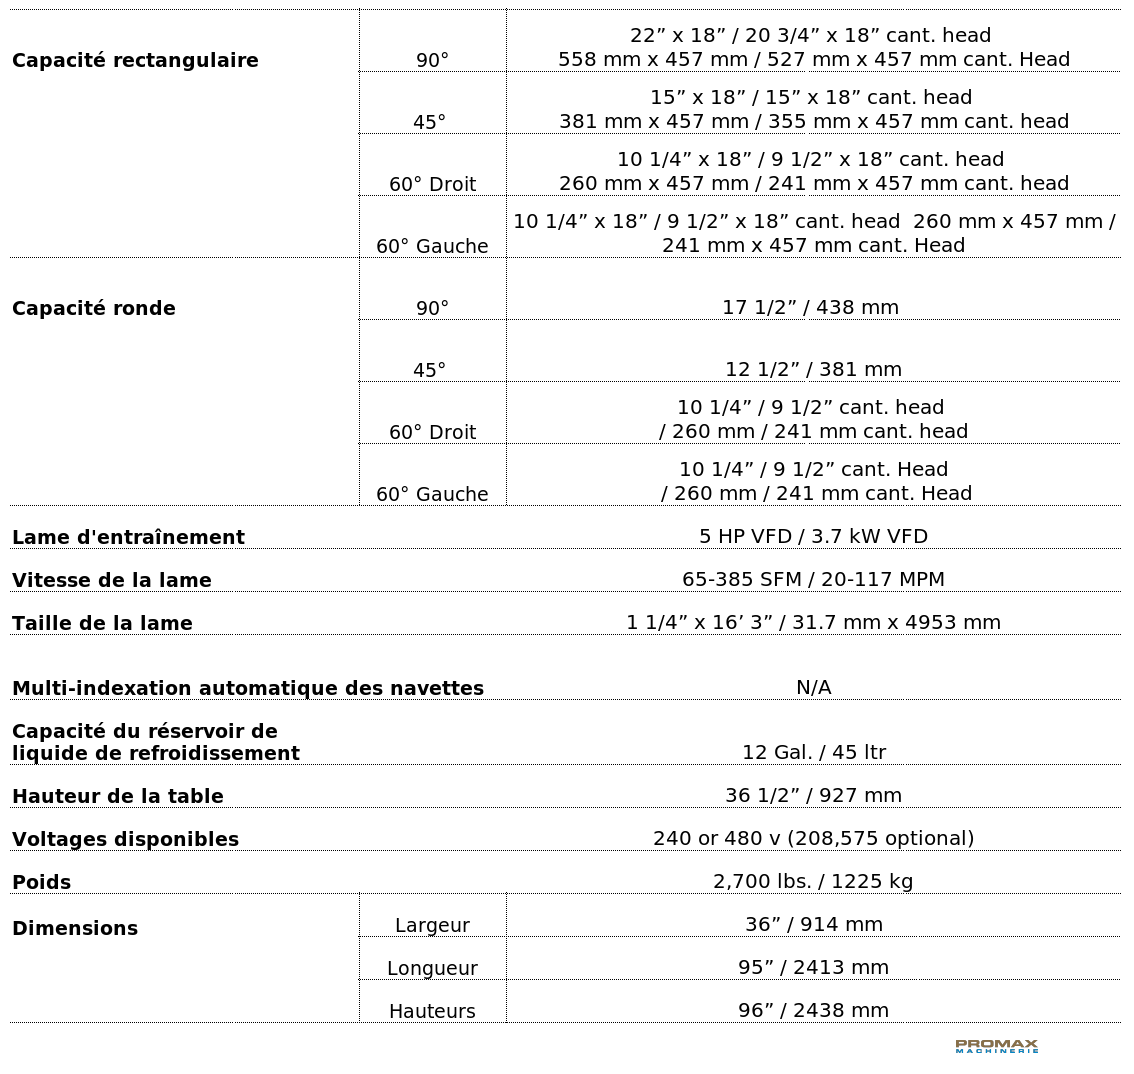 VW-18 Technical Specification